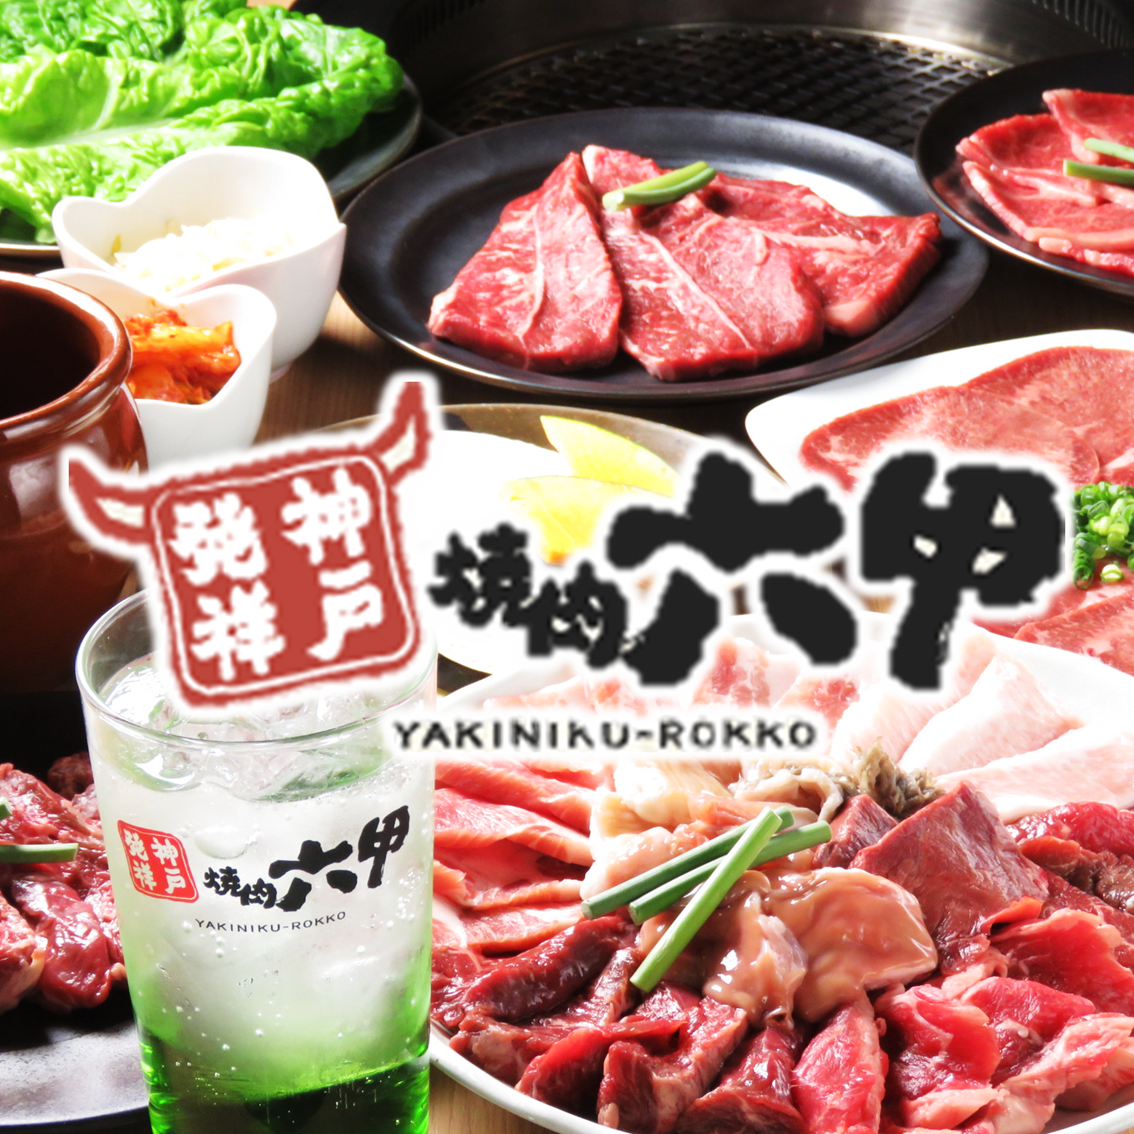 All-you-can-eat and drink starting from 4,760 yen♪Tsubozuke kalbi is also available! Reservations for banquets are being accepted!